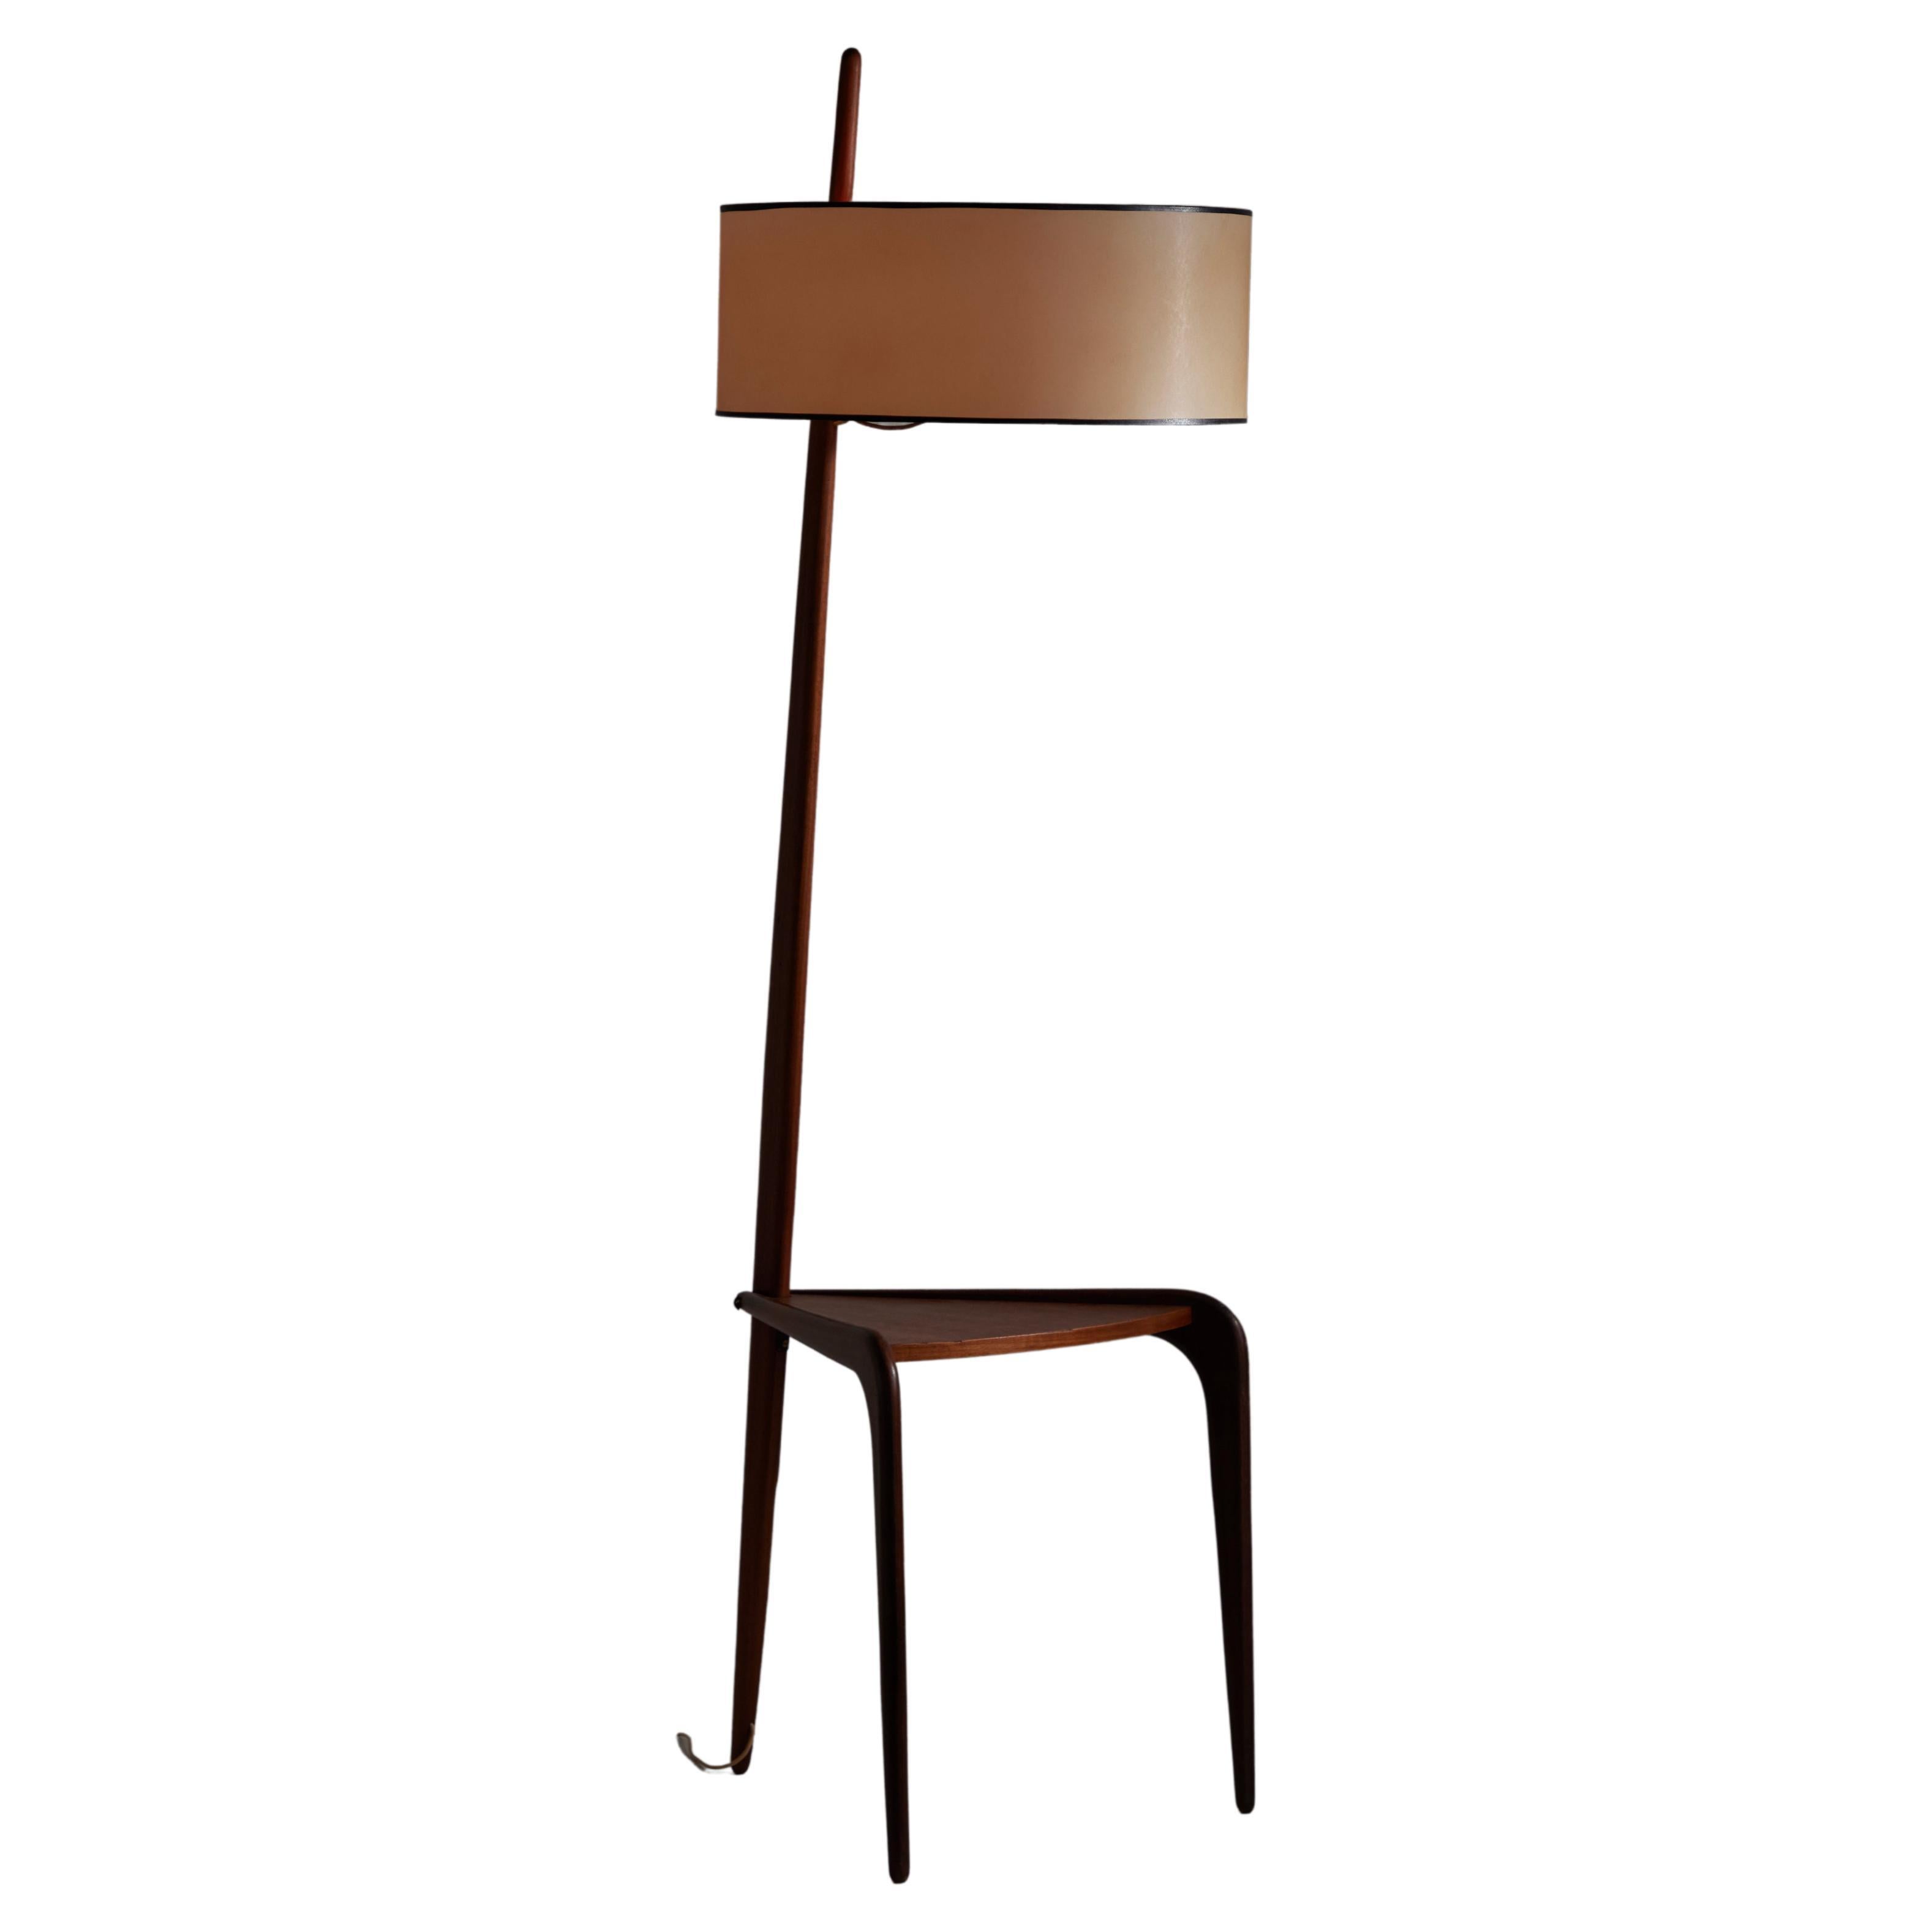 Rare Model 167.A82 Floor Lamp by Rispal For Sale